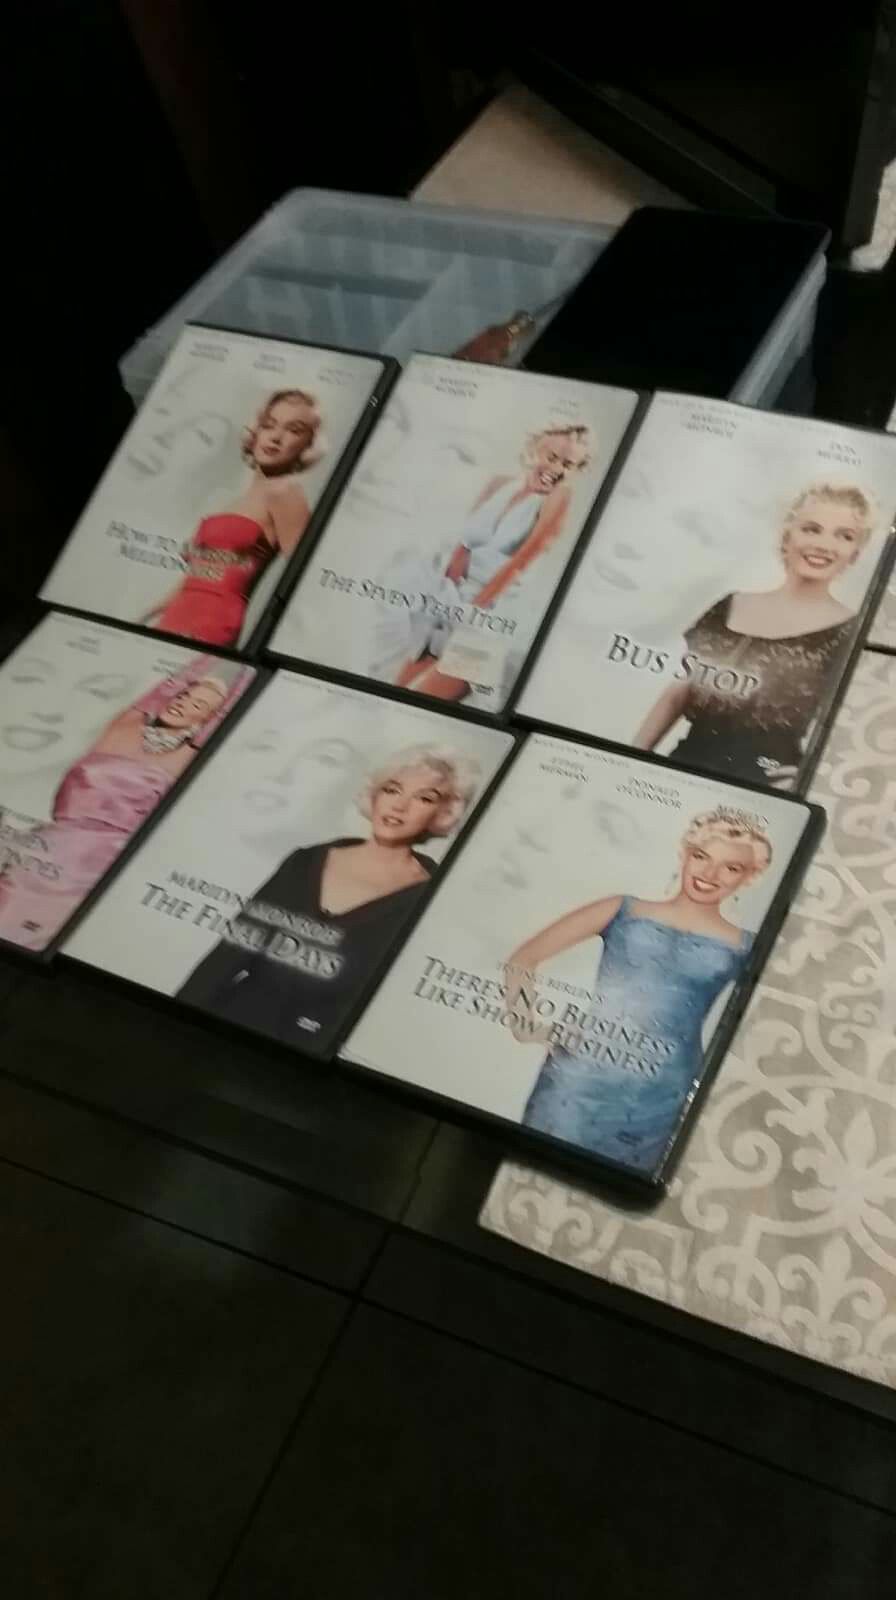 Marylin Monroe dvd collection. 6 dvds.